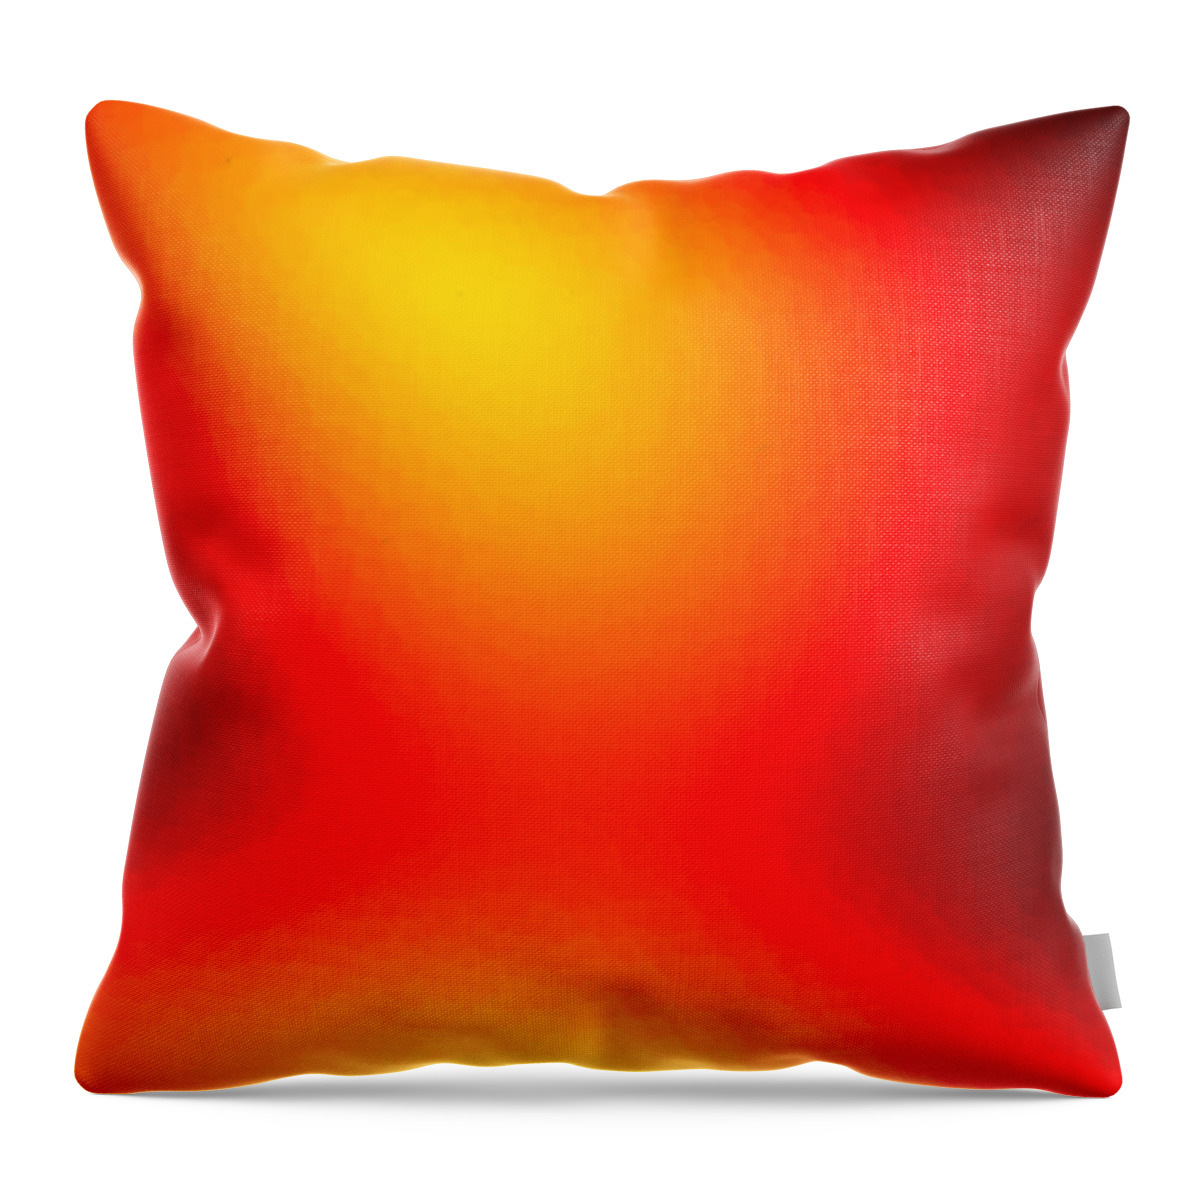 Fire Throw Pillow featuring the digital art Icamo by Jeff Iverson